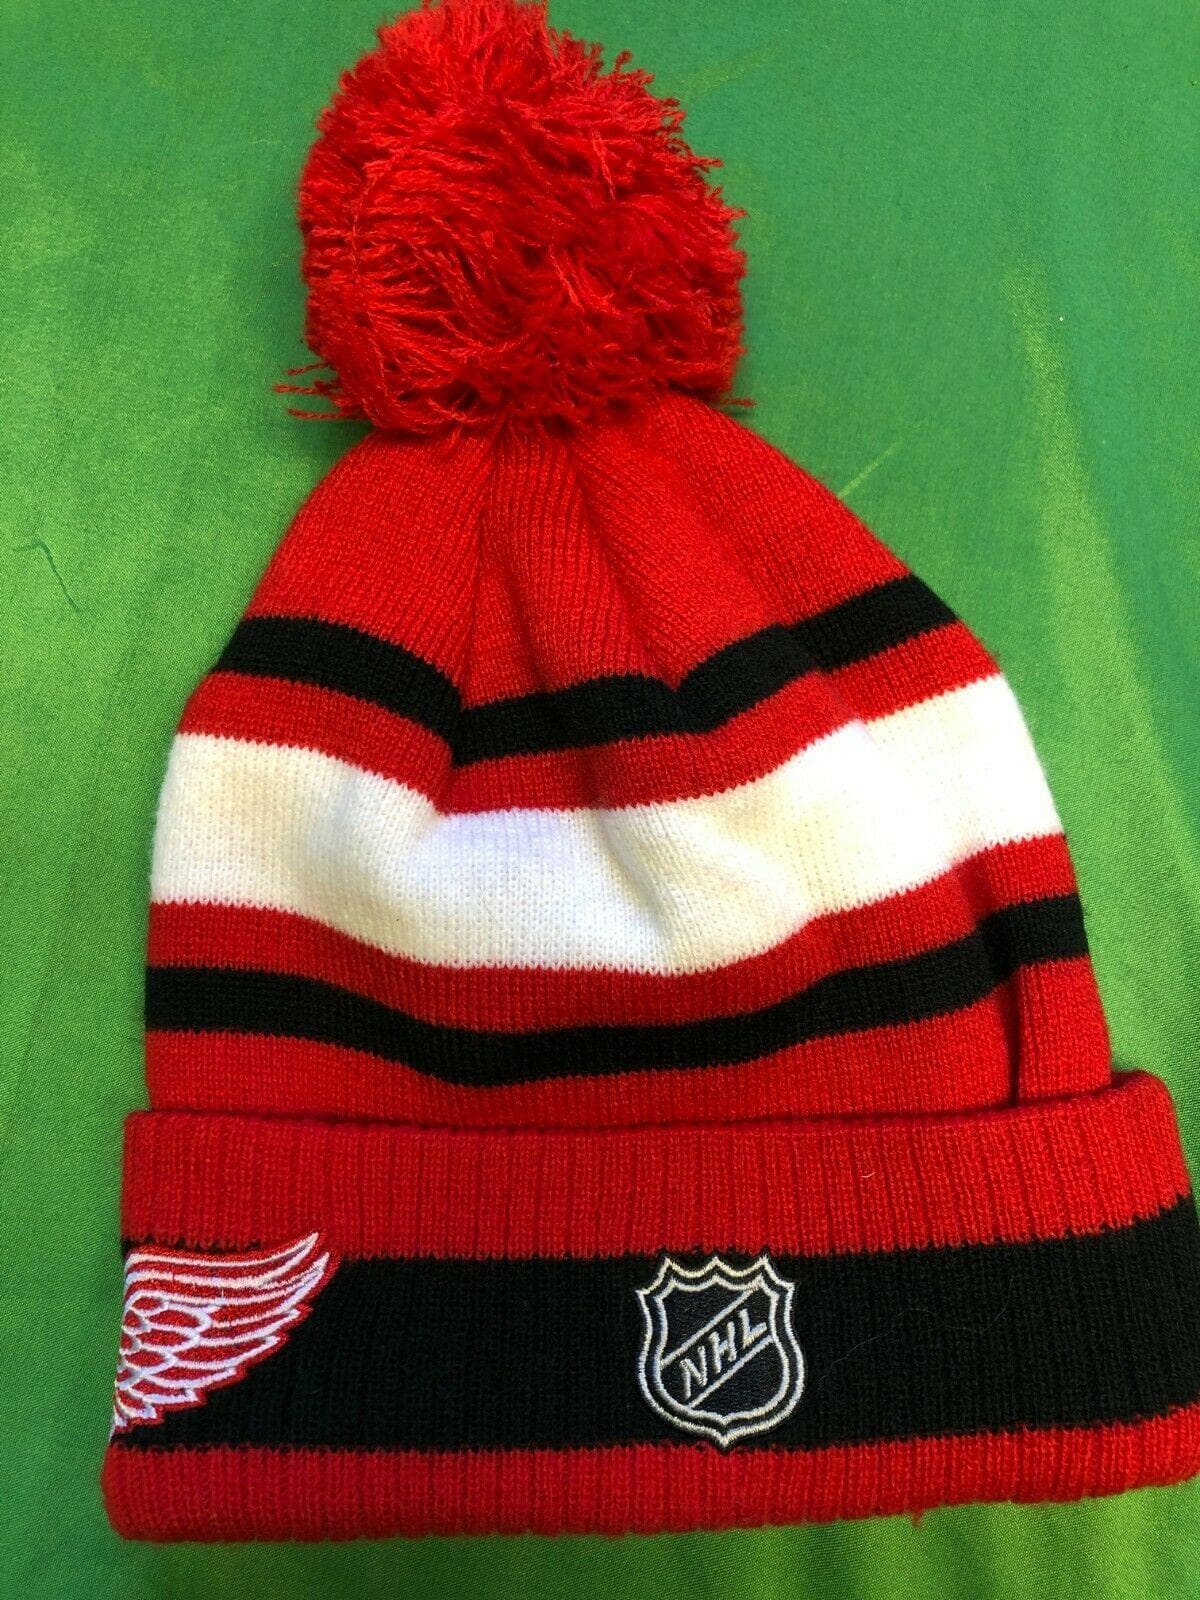 NHL Detroit Red Wings Woolly Bobble Hat Youth OSFA 8-20